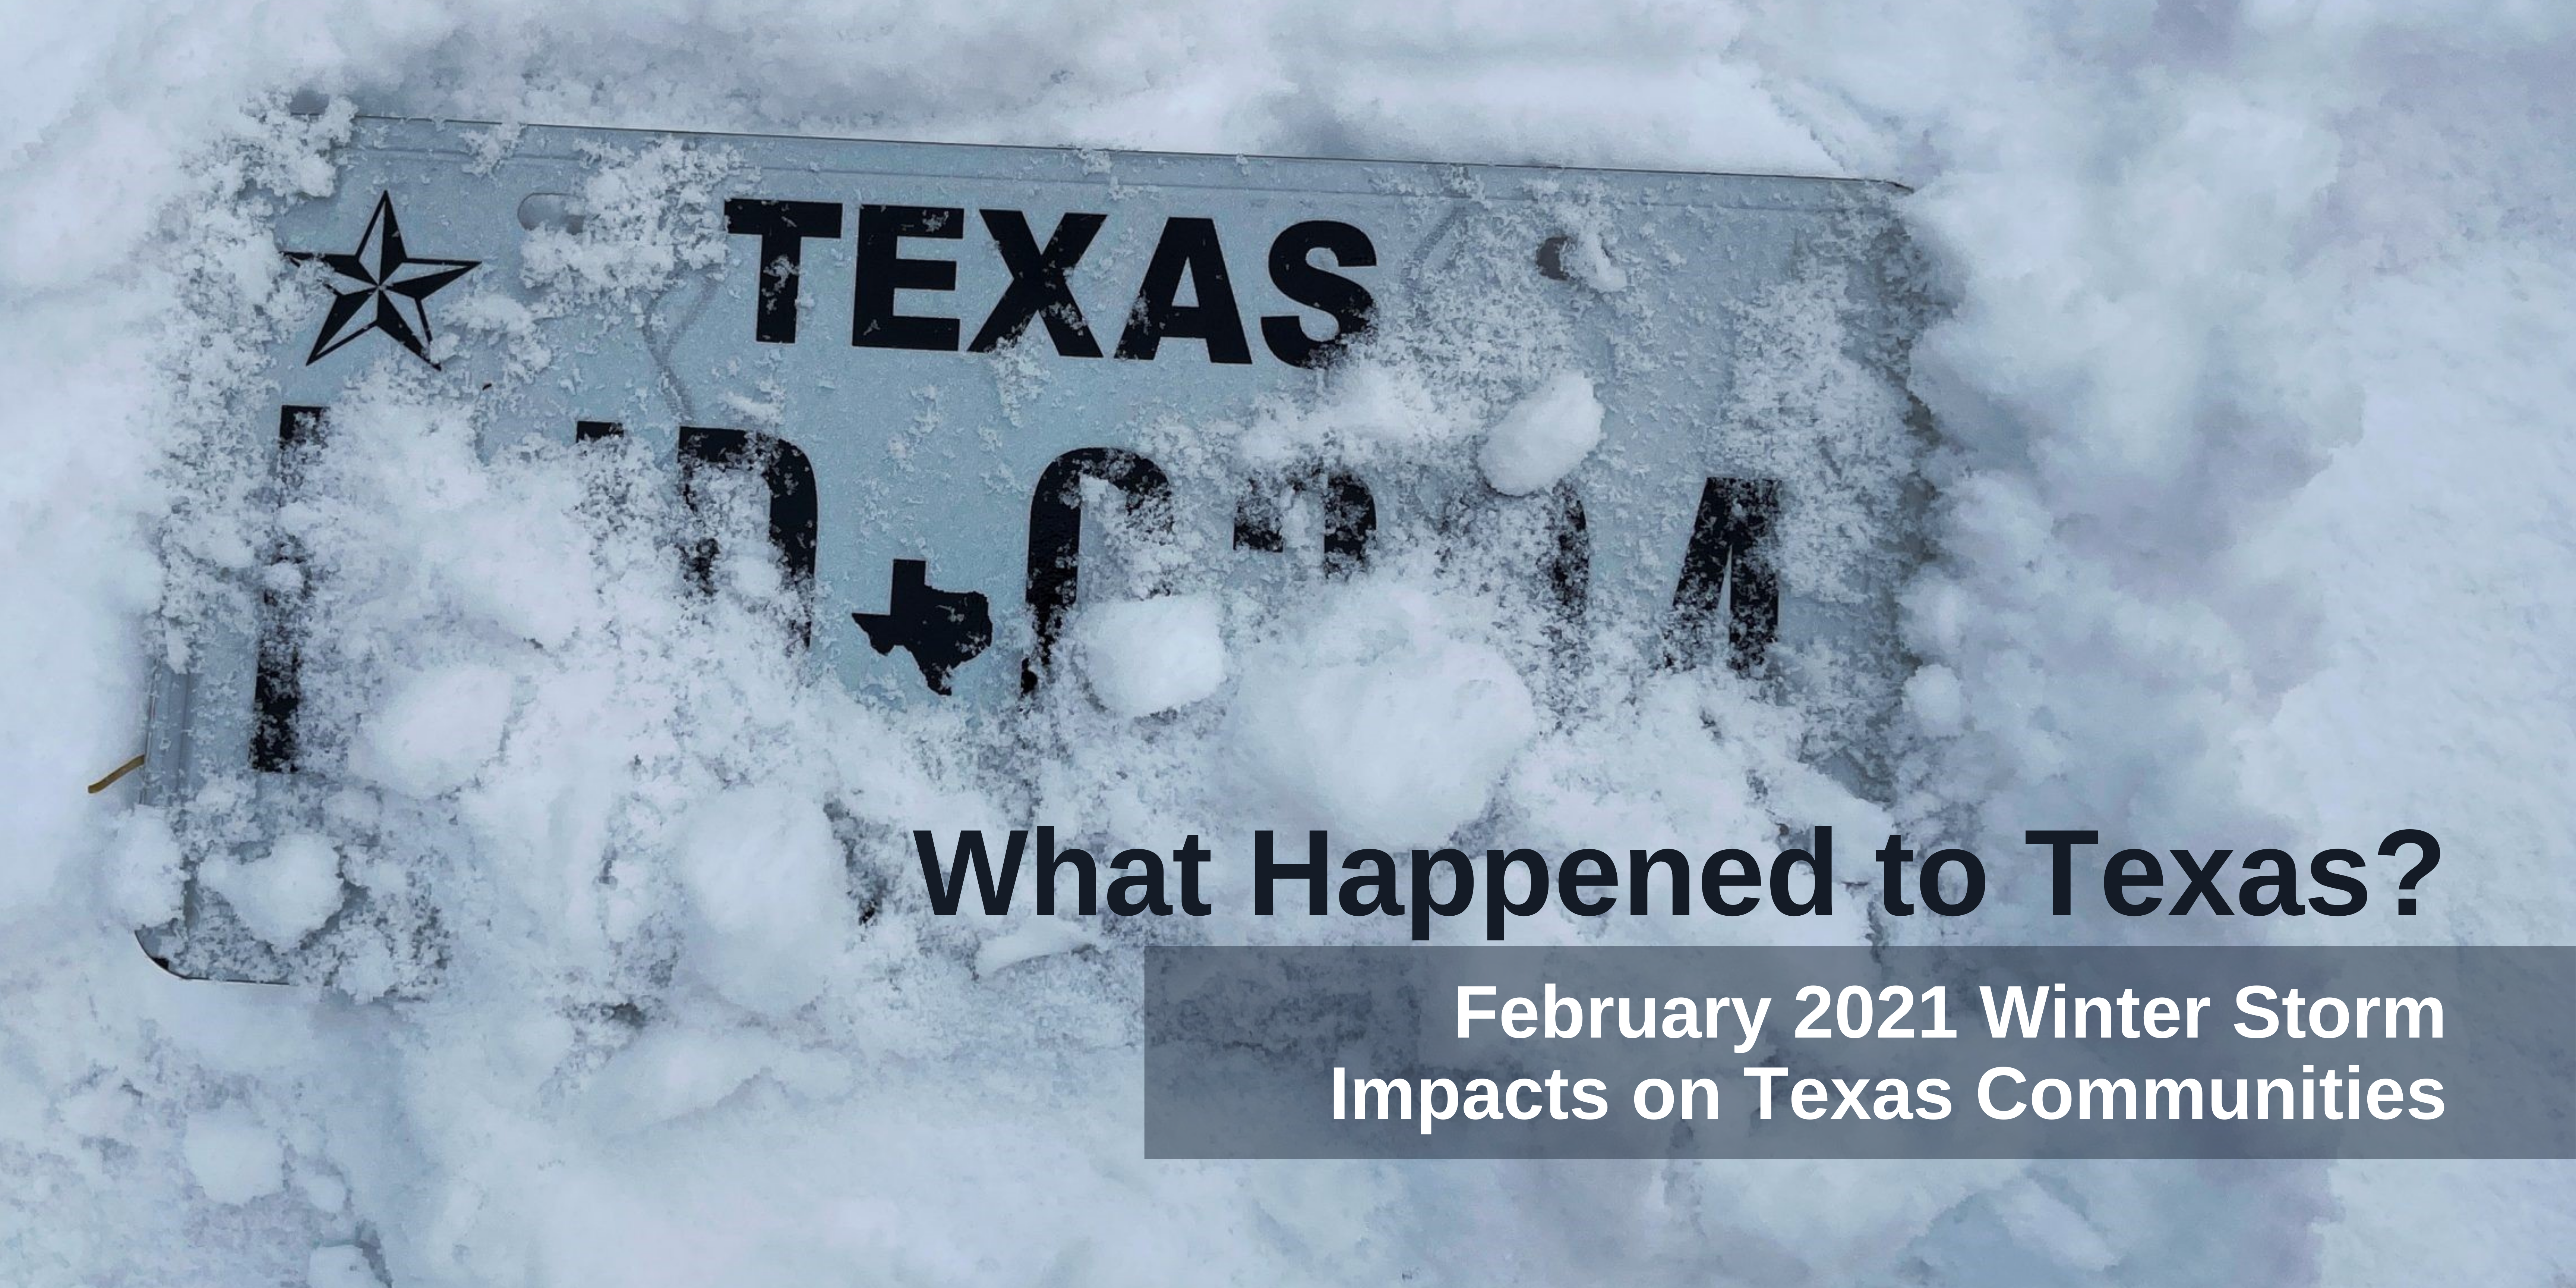 What happened to Texas? February 2021 Winter Storm Impacts on Texas Communities